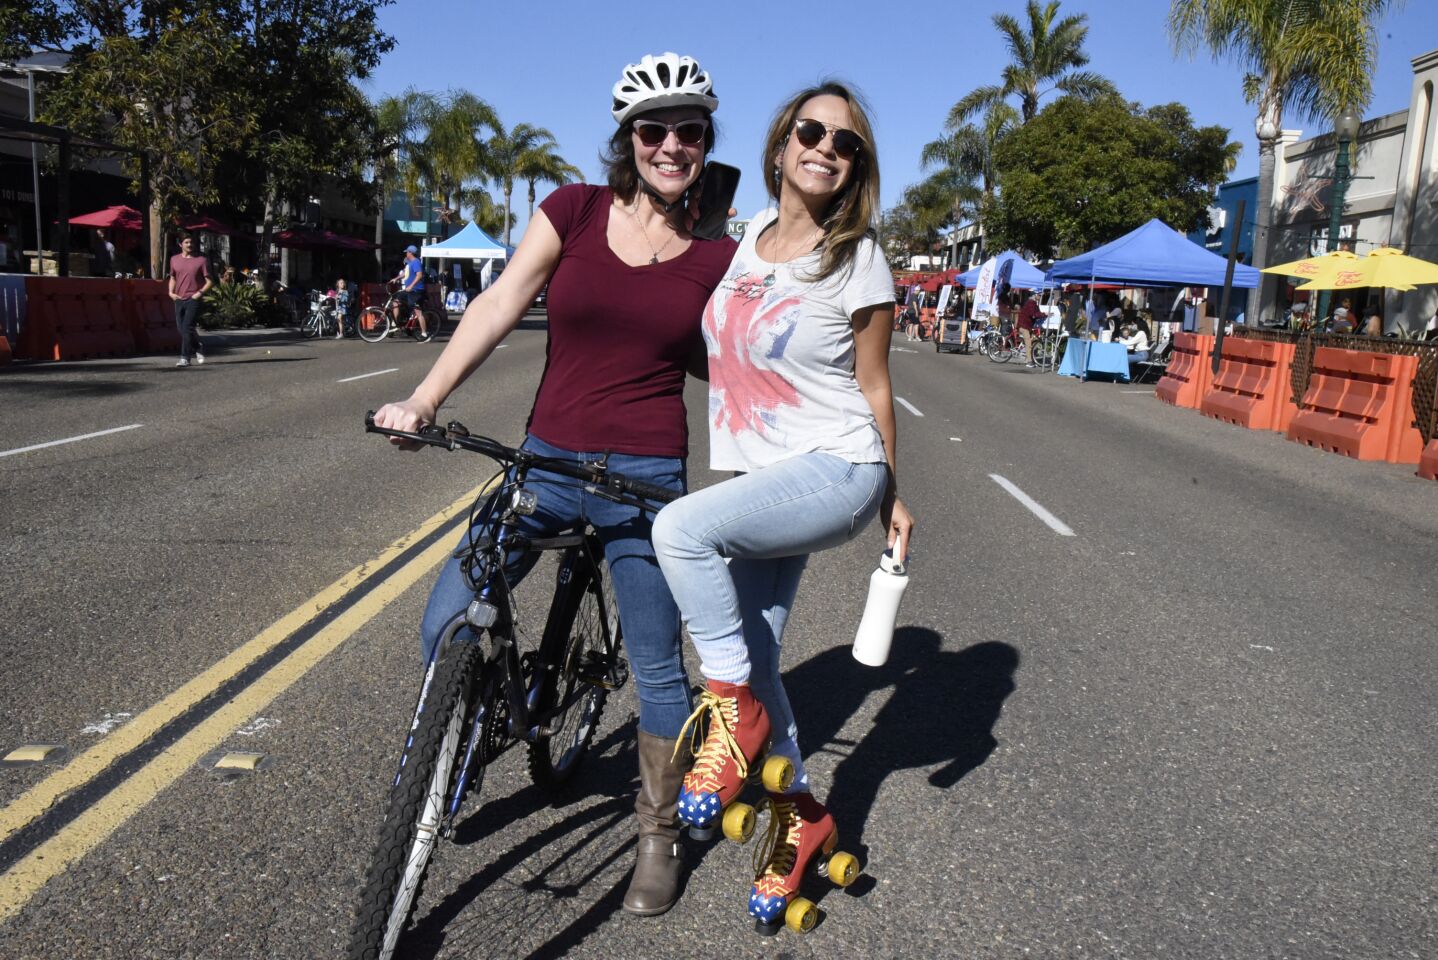 Emily Shaules and Marcela Guaman. Marcela grew up in Colombia, home of the first Cyclovia event, which she attended as a child.